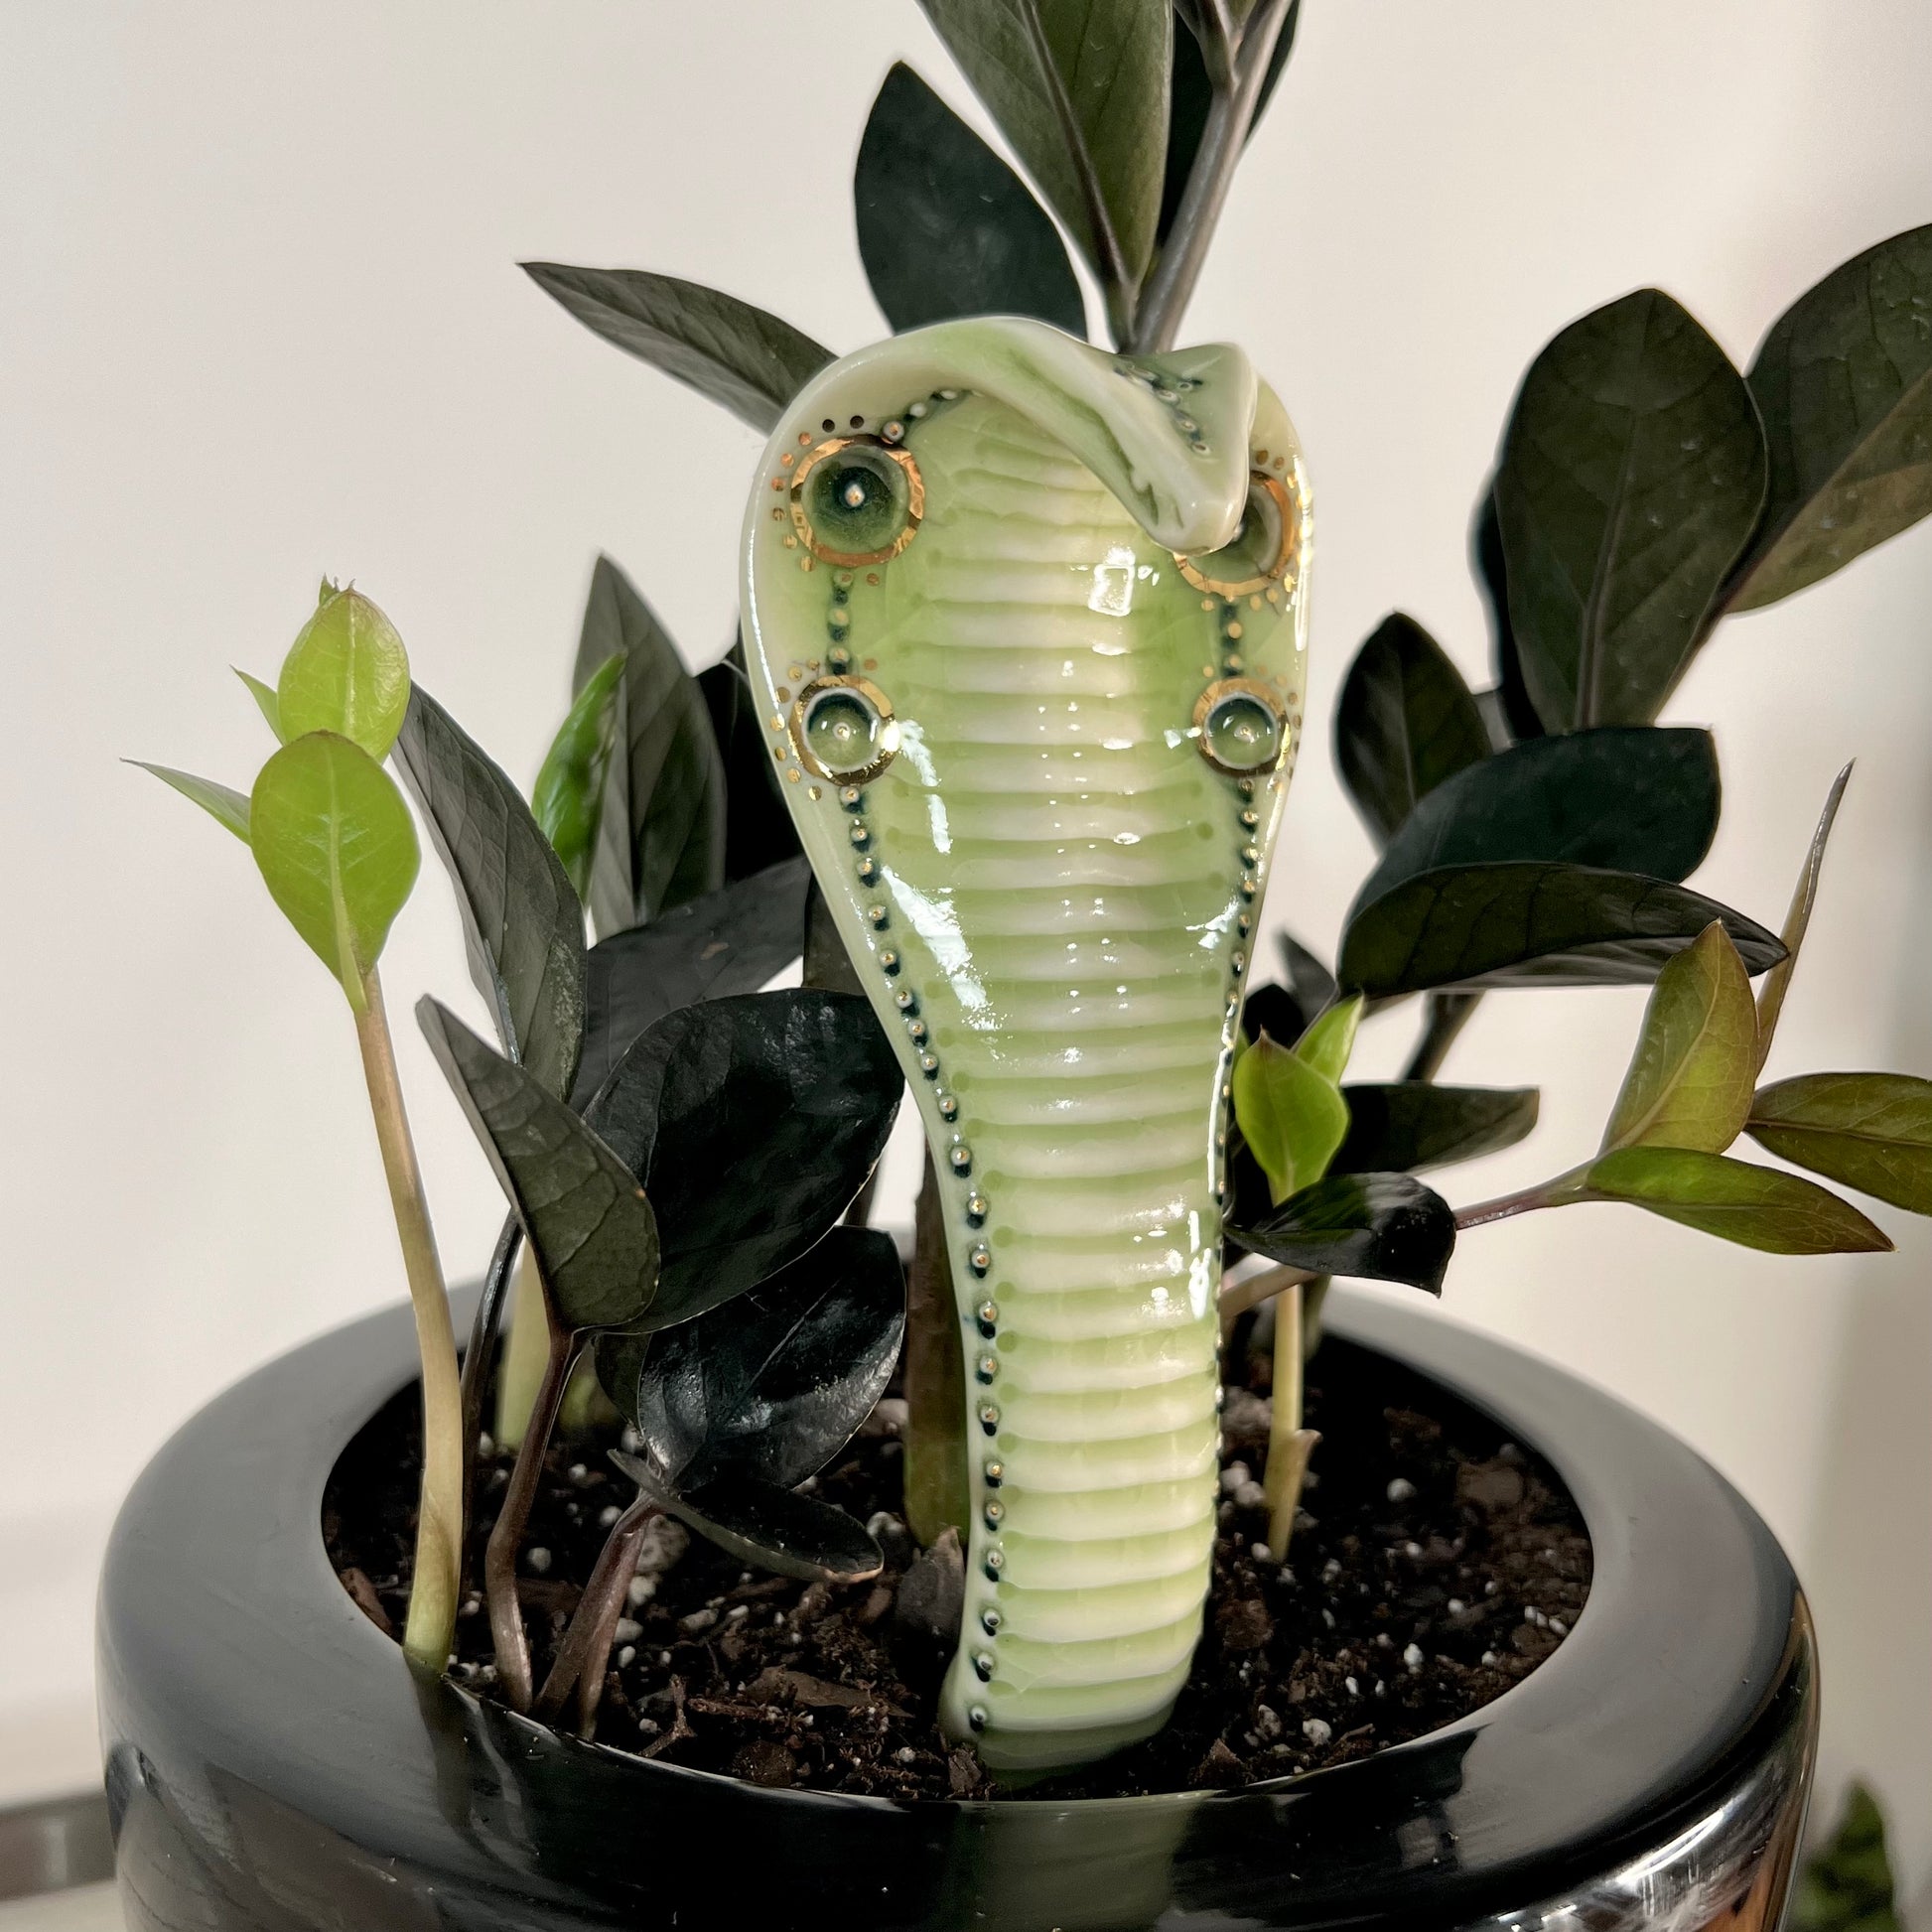 Product Image: Planter Snake 3 - Hand crafted Porcelain Home Ornament. Snake with Brass Rod for placing in pots with plants.